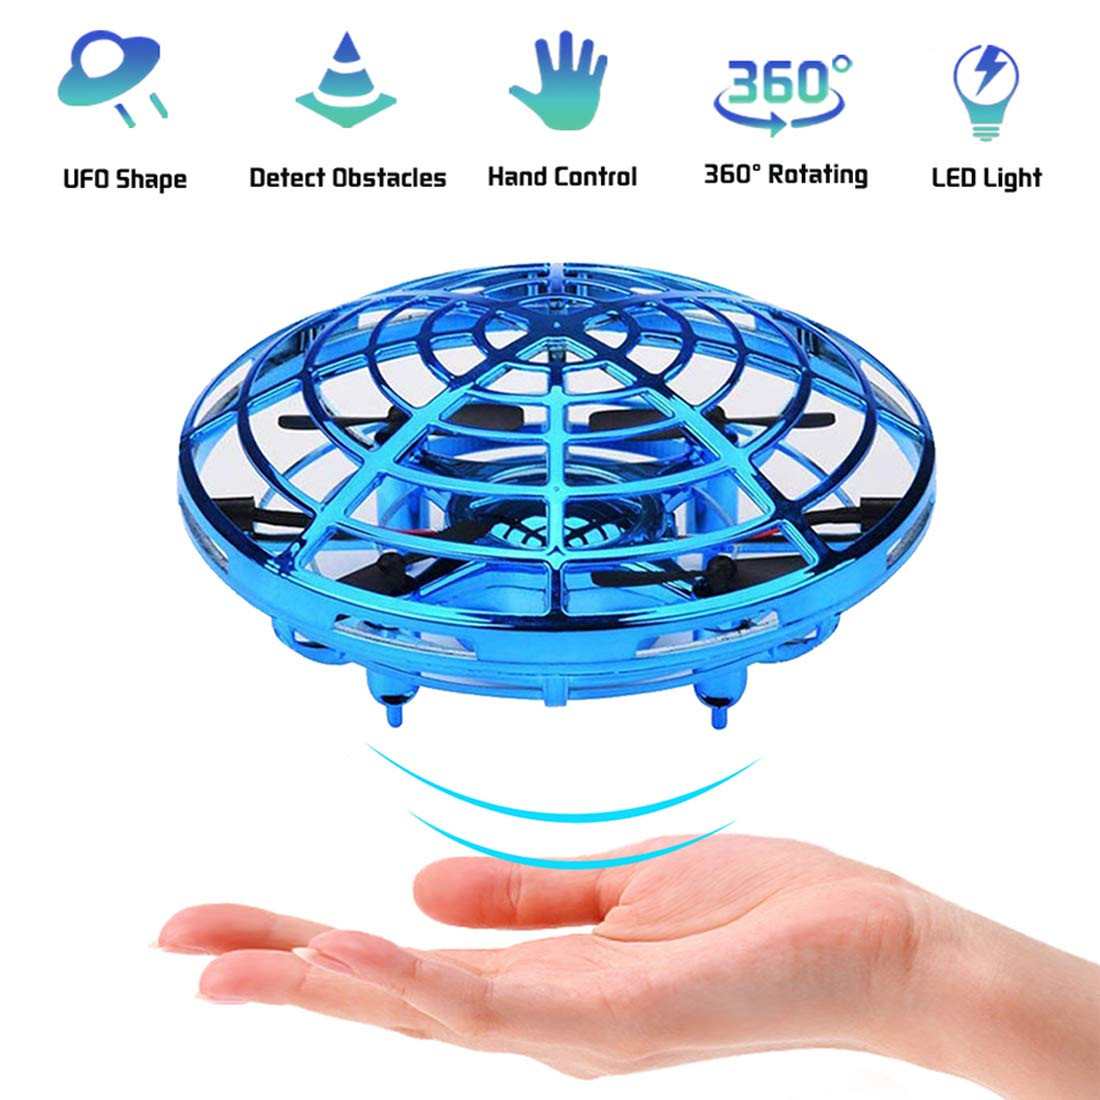 Mini Drone Flying Toys Interactive Infrared Induction Helicopter Ball Hand Controlled Quadcopters Flying Ball Toys,Mini Indoor Drone Helicopter Toy Shining LED Lights Flying Drones for Kids Blue 